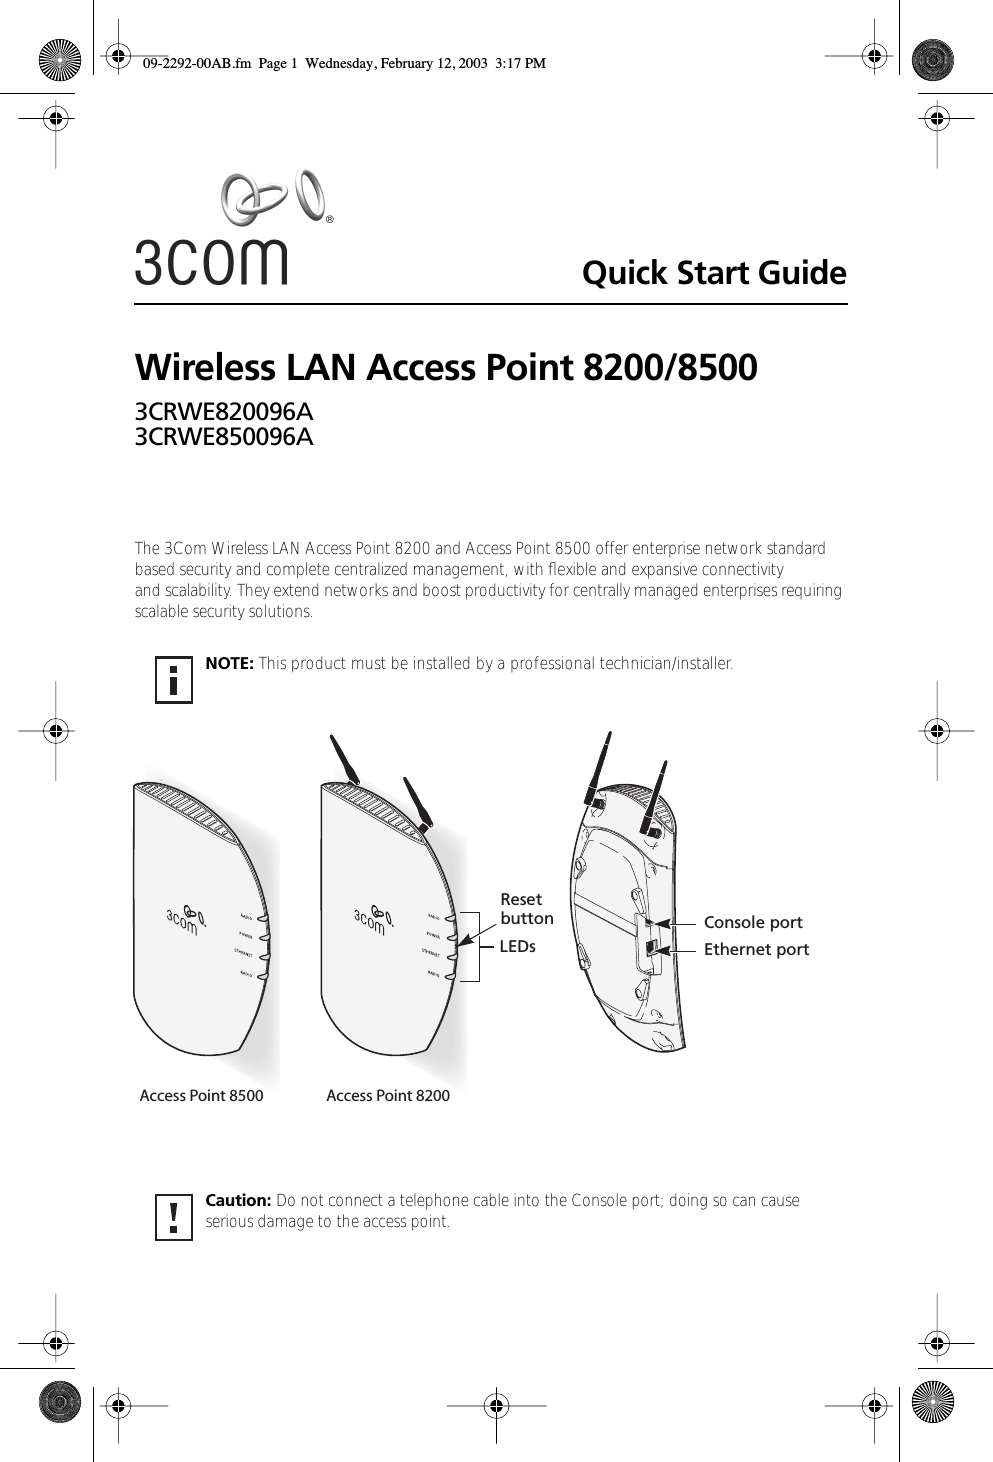  Quick Start Guide Wireless LAN Access Point 8200/8500 3CRWE820096A3CRWE850096A The 3Com Wireless LAN Access Point 8200 and Access Point 8500 offer enterprise network standard based security and complete centralized management, with ﬂexible and expansive connectivity and scalability. They extend networks and boost productivity for centrally managed enterprises requiring scalable security solutions.  NOTE:  This product must be installed by a professional technician/installer.  Caution:  Do not connect a telephone cable into the Console port; doing so can cause serious damage to the access point.LEDsResetbutton Console portEthernet portAccess Point 8500 Access Point 8200 09-2292-00AB.fm  Page 1  Wednesday, February 12, 2003  3:17 PM